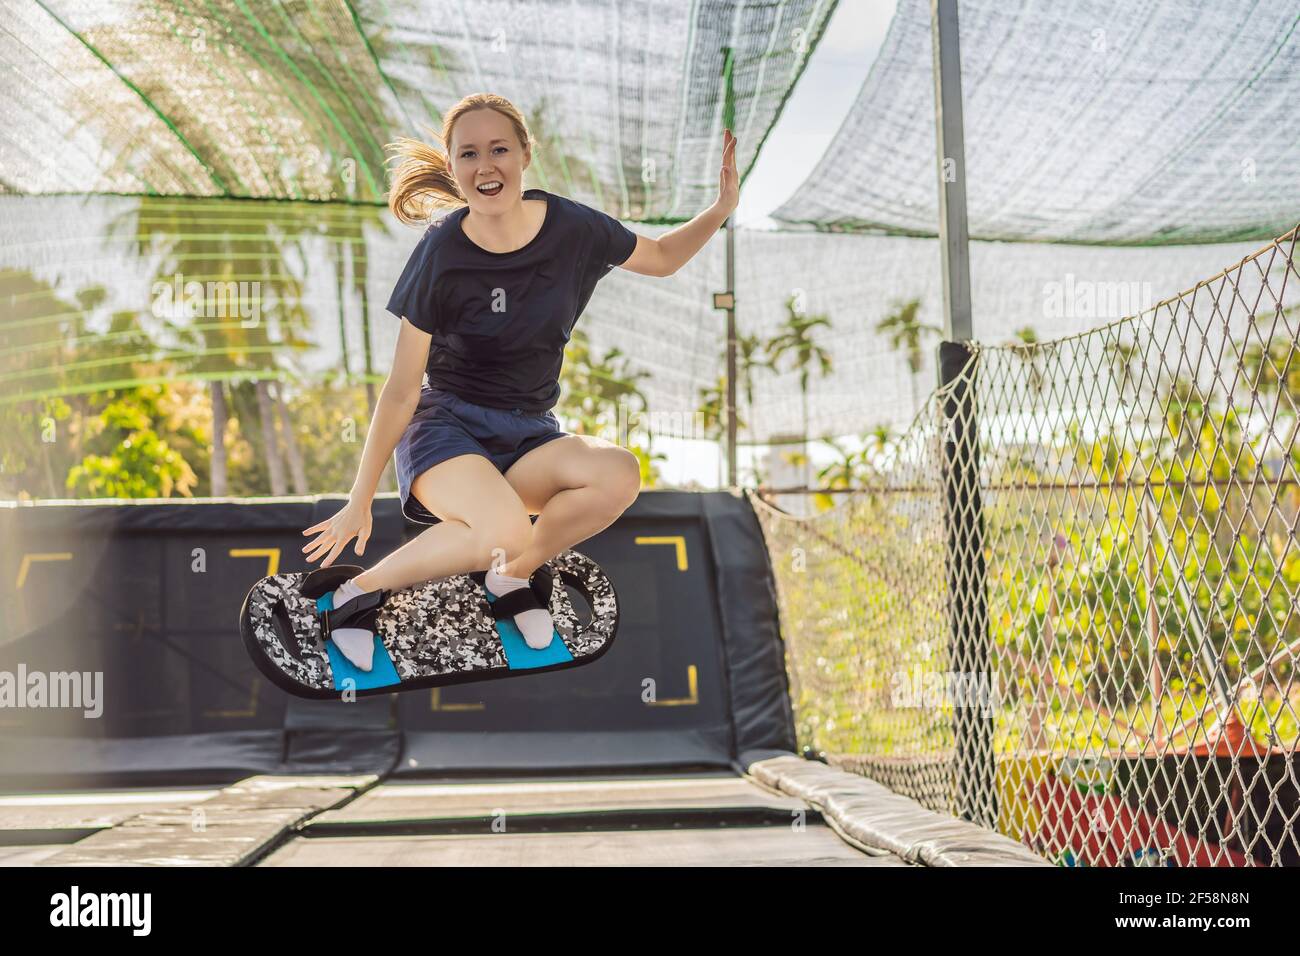 Young woman on a soft board for a trampoline jumping on an outdoor trampoline, against the backdrop of palm trees. The trampoline board is like a Stock Photo